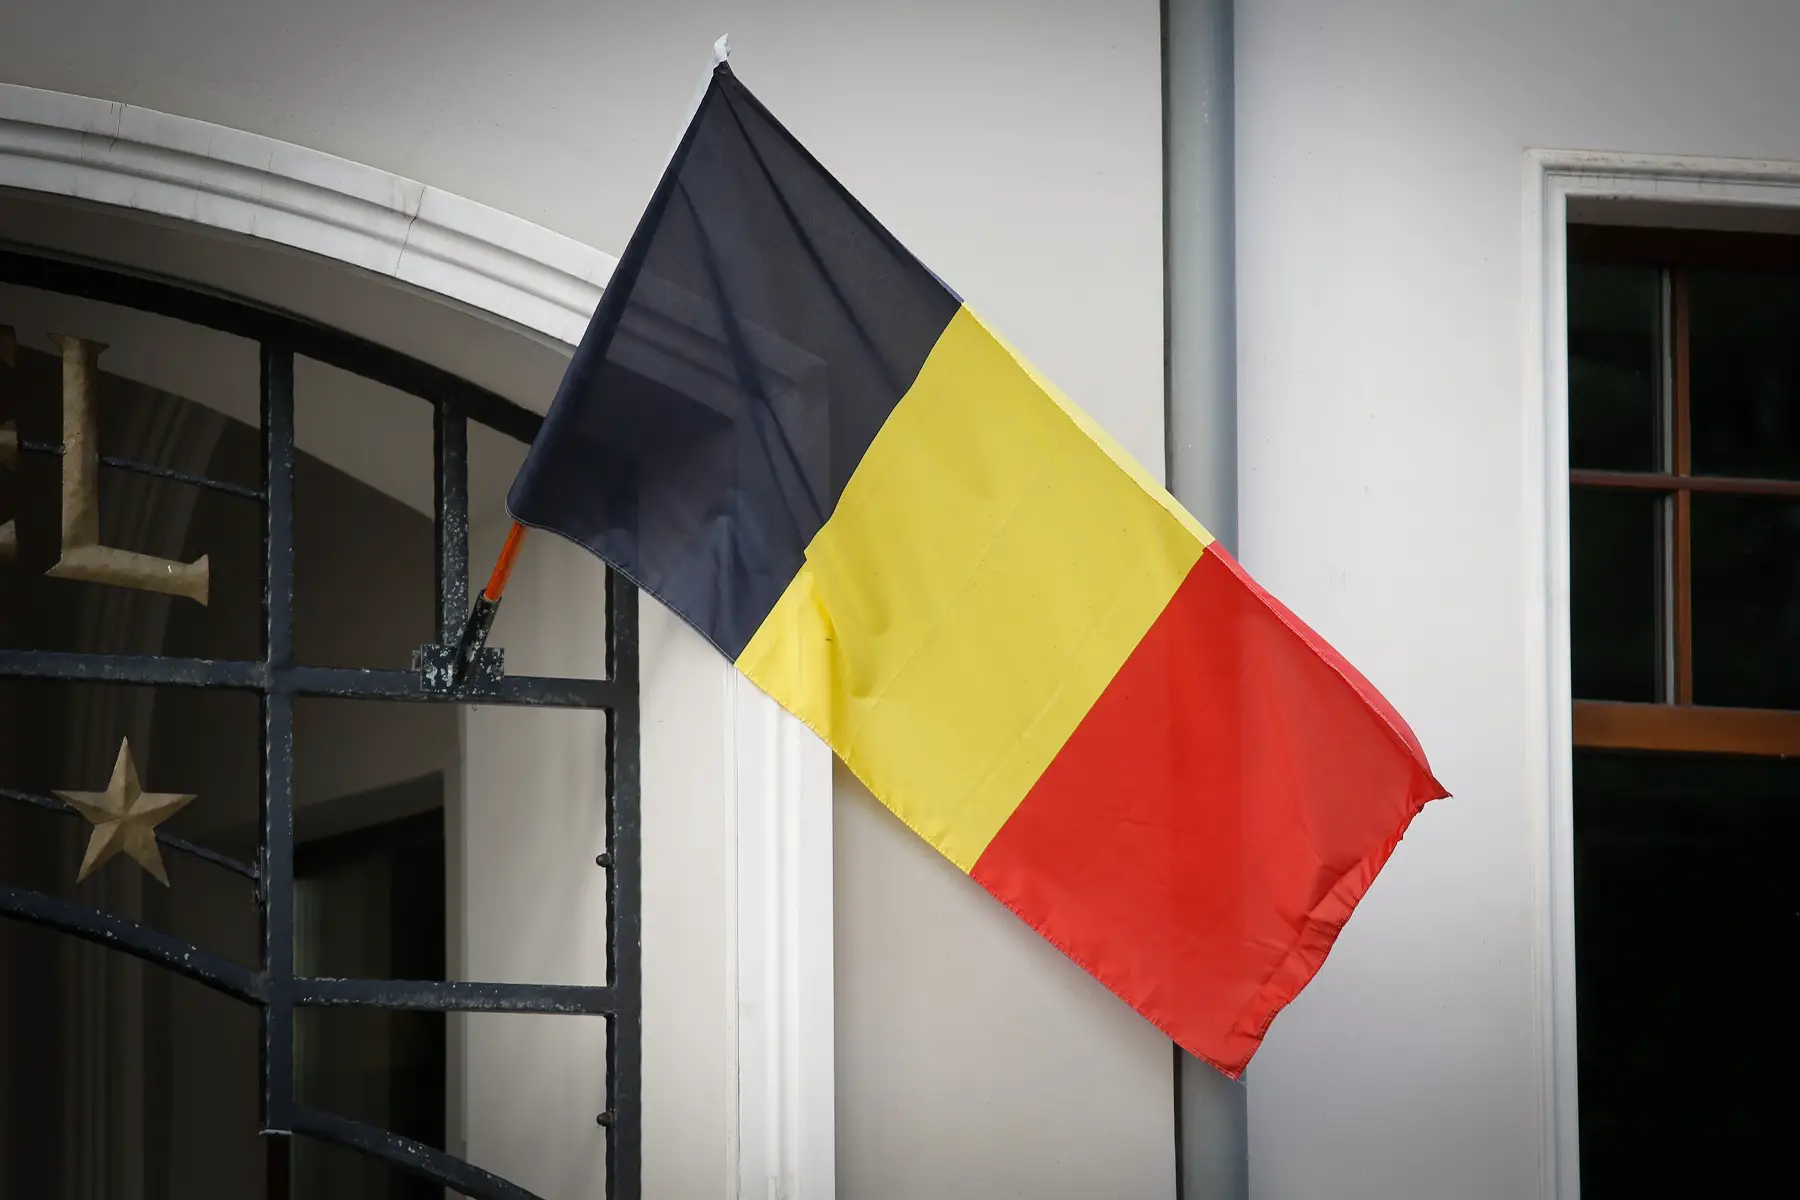 Student visa applications can be filed at a Belgian embassy or consulate, such as at the Belgian Honorary Consulate in Bydgoszcz, Poland.